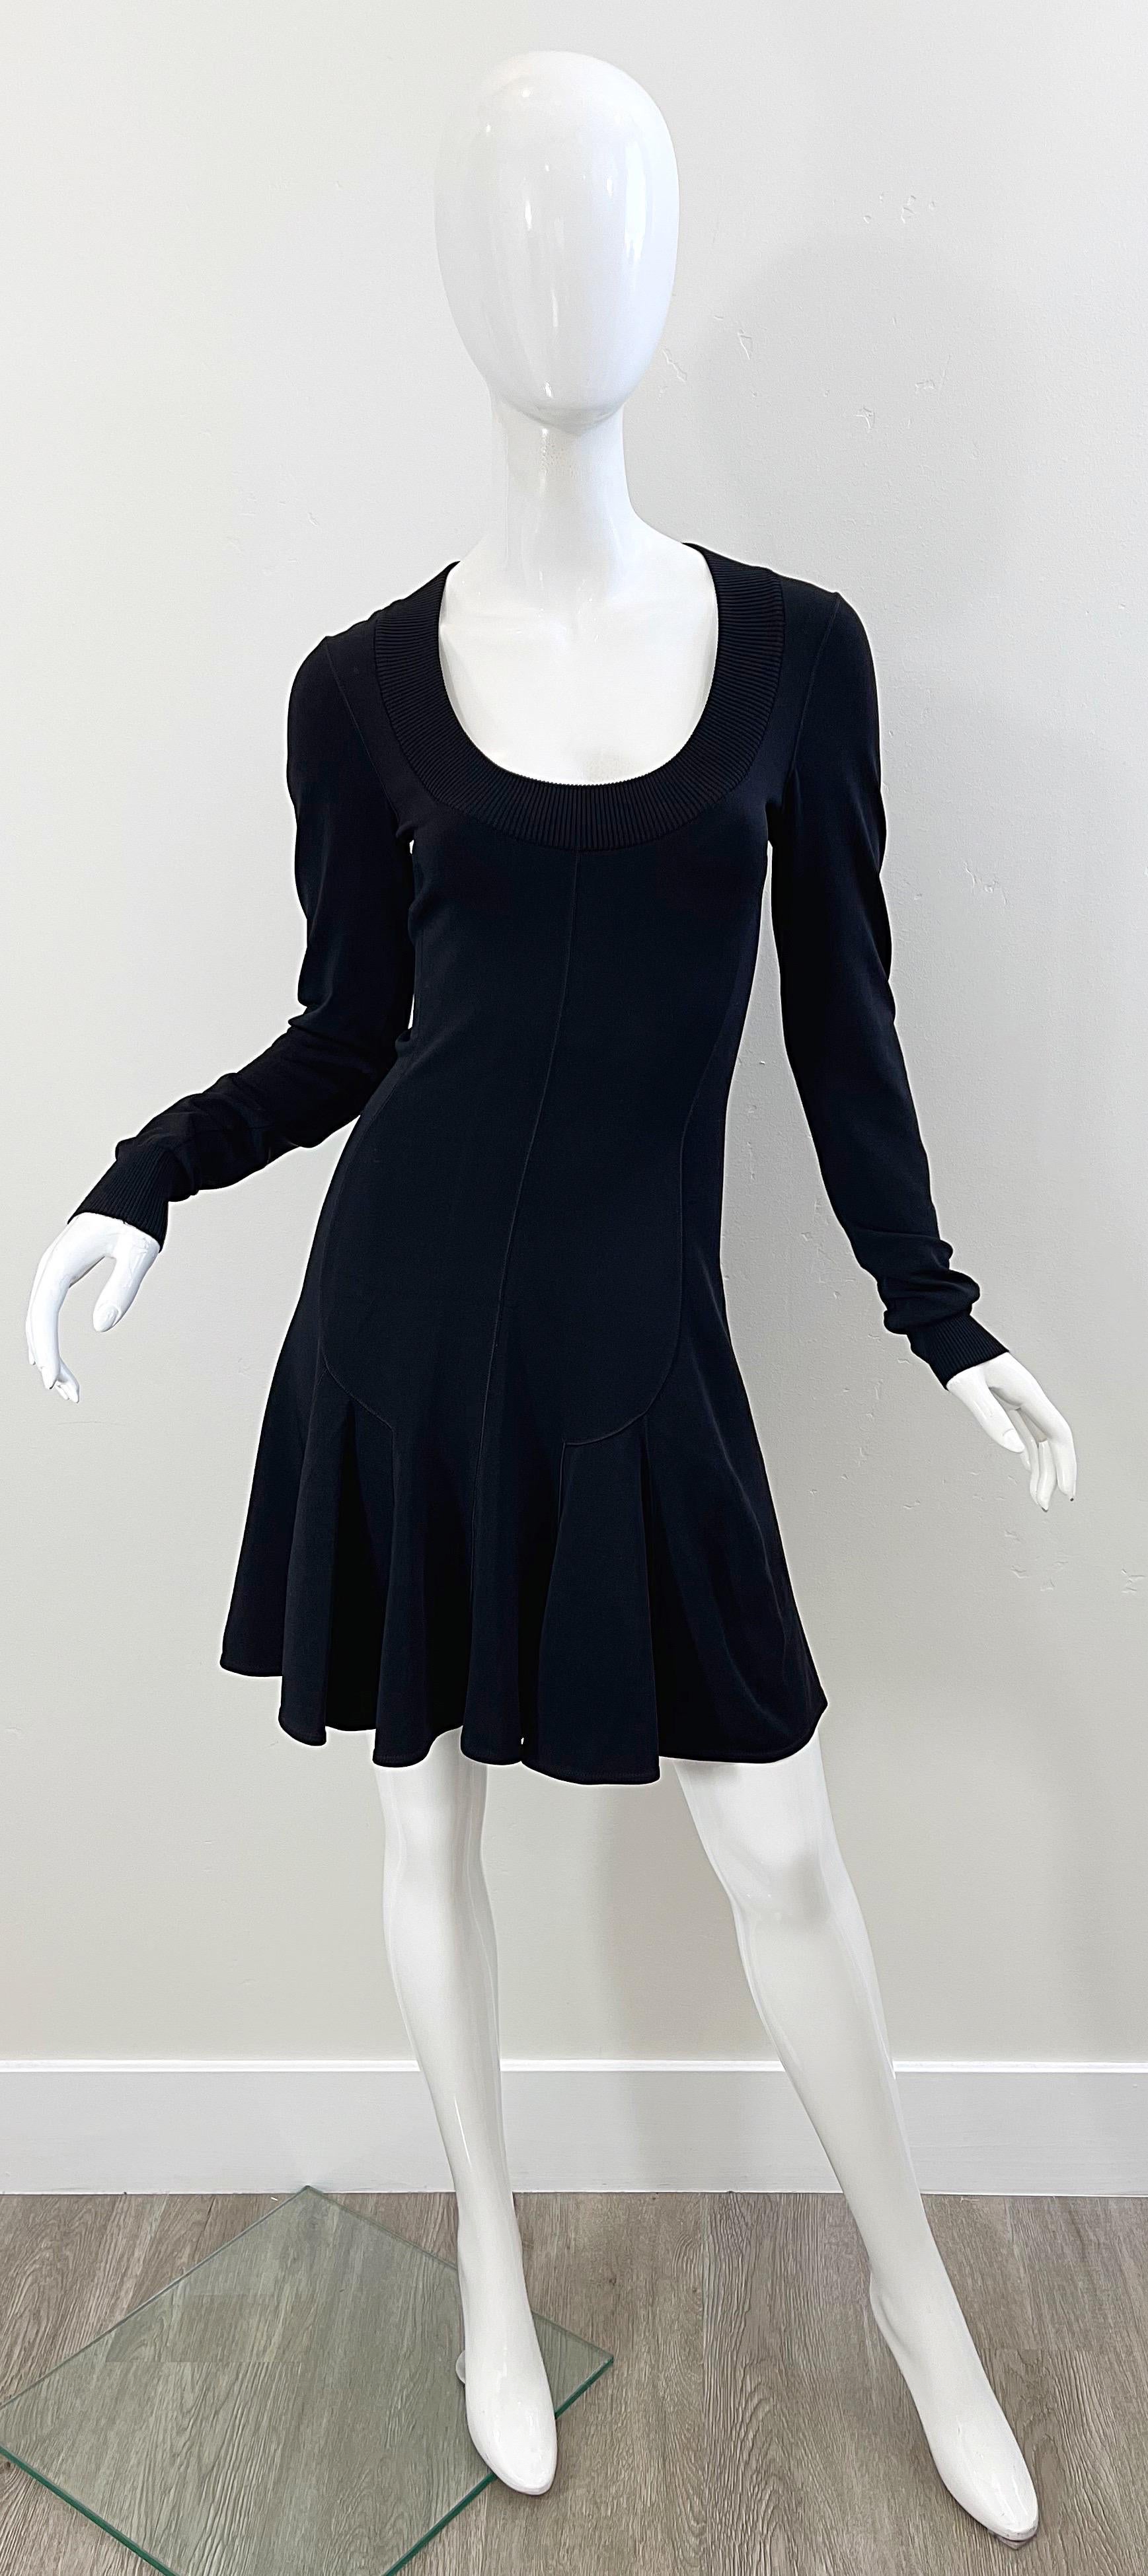 The perfect little black dress from none other than the legendary AZZEDINE ALAIA ! This early 90s piece features a tailored bodice with a flirty skater skirt. Flattering lines that only Alaia could produce. Soft jersey fabric of Rayon (60%), Nylon